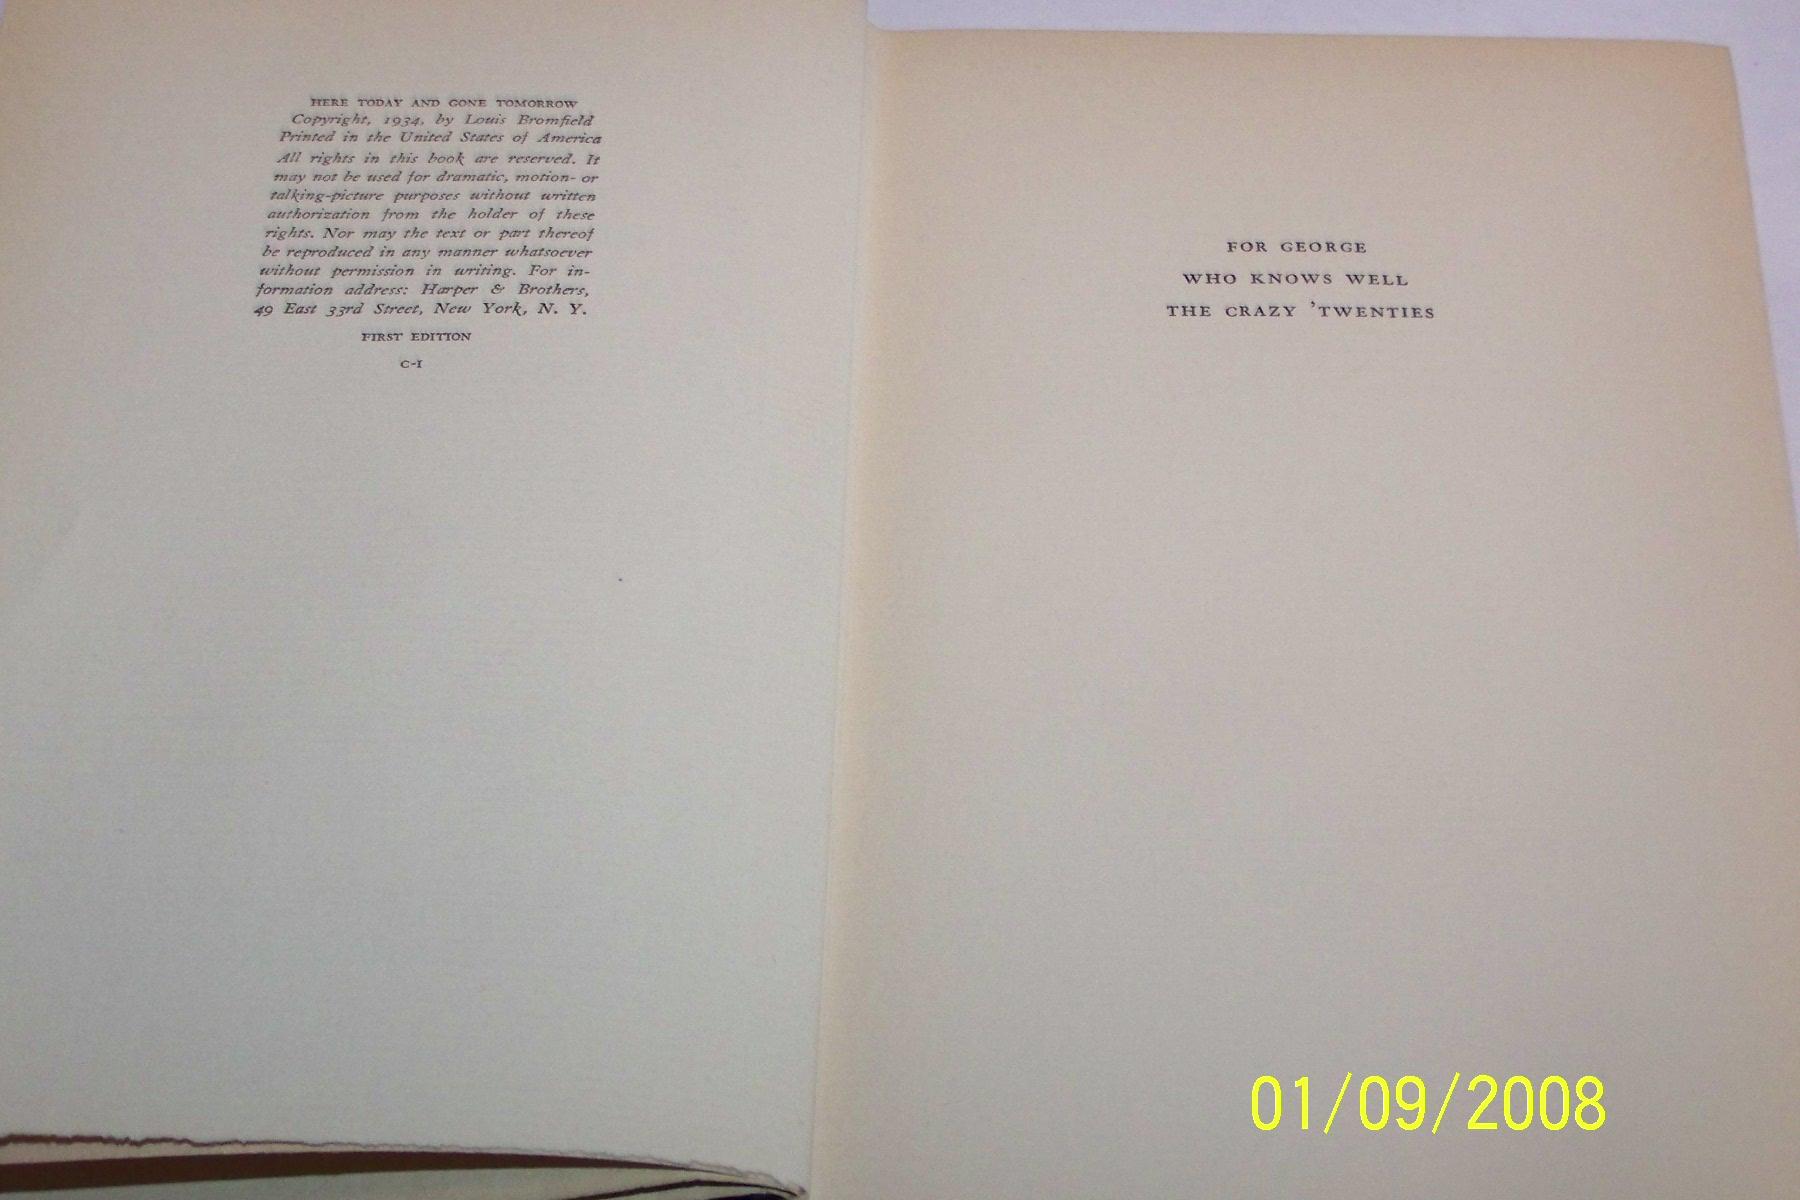 Here Today And Gone Tomorrow By Lewis Bromfield Very Good Plus Hardcover 1934 First Edition Signed By The Author Mclinhavenbooks Ioba